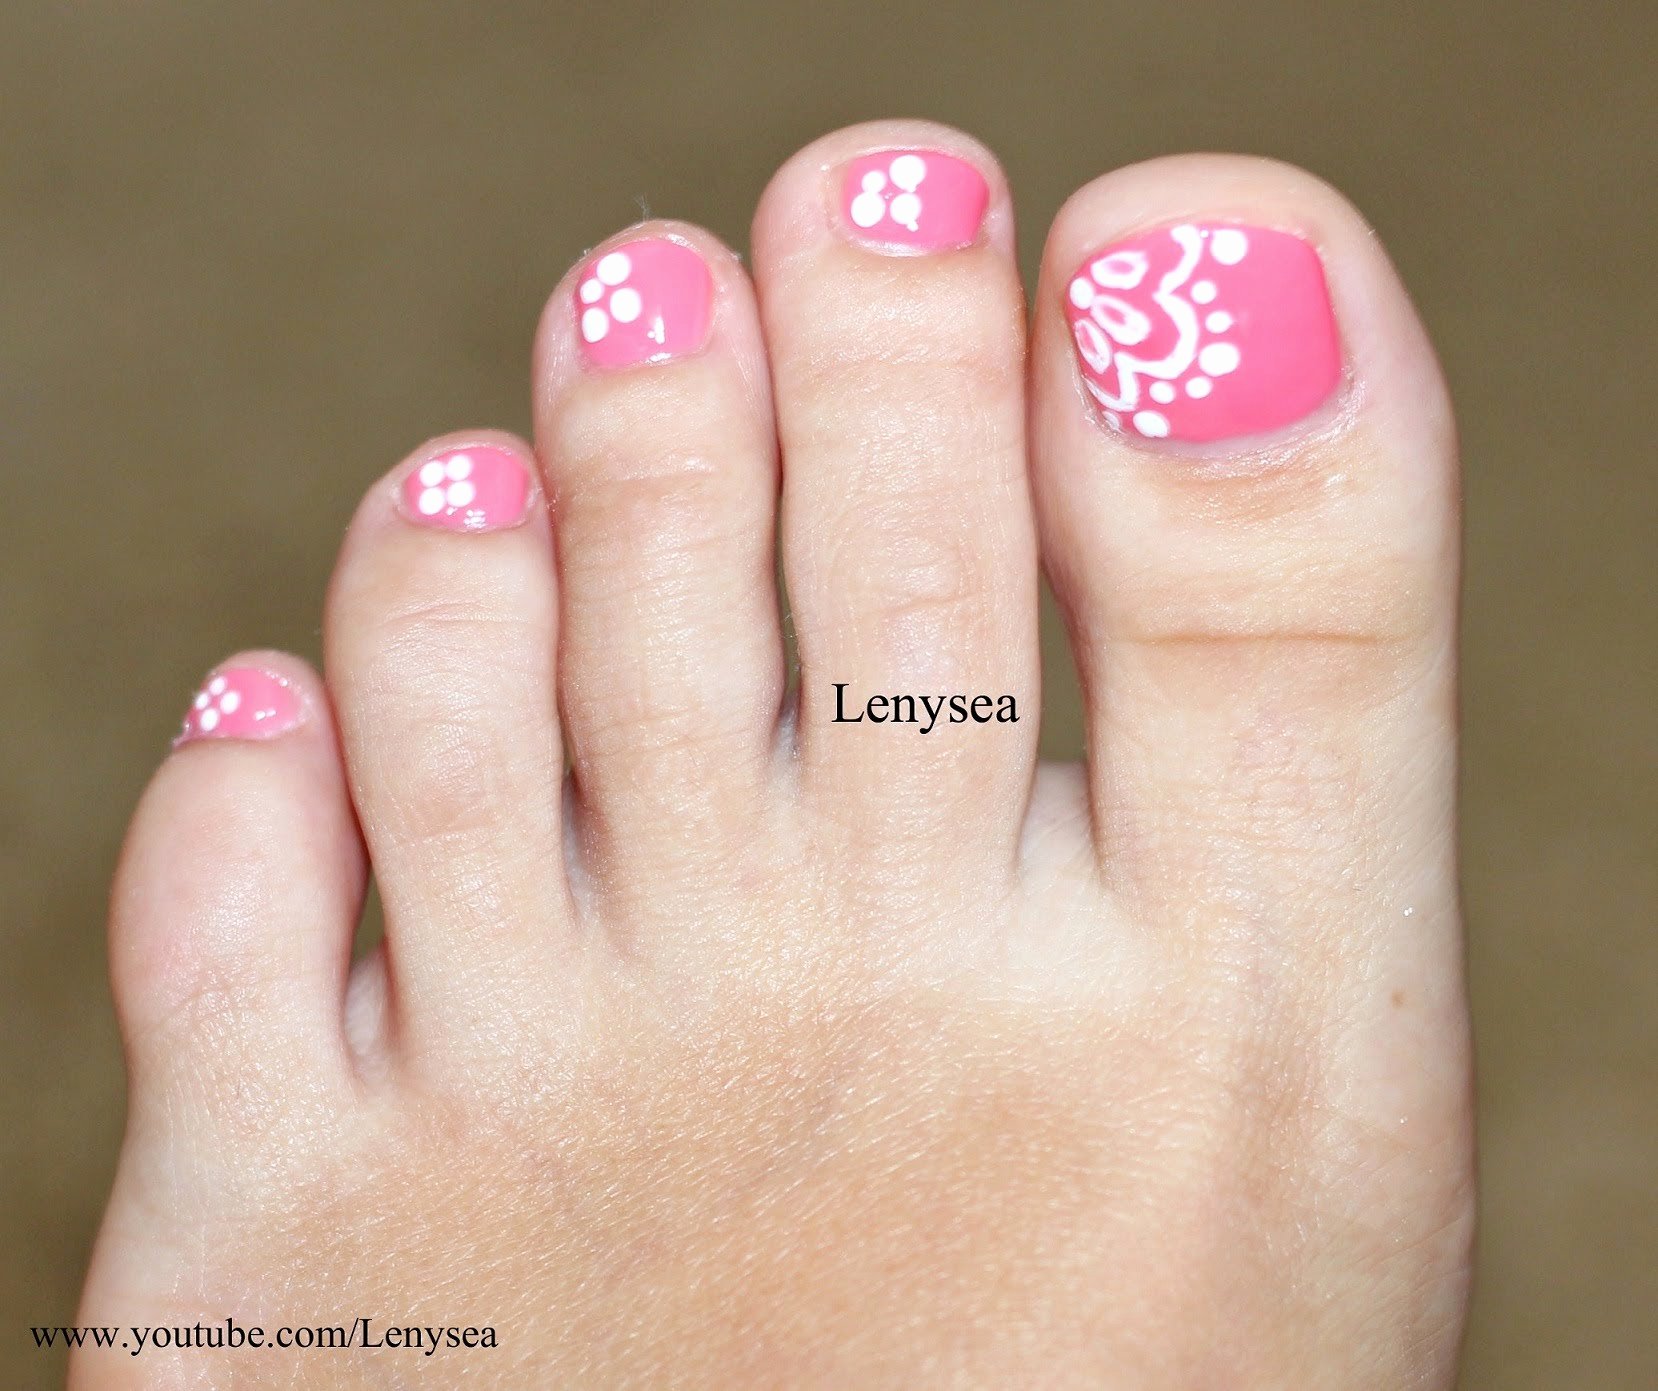 Nail Art Designs for toes Elegant How to Get Your Feet Ready for Summer 50 Adorable toe